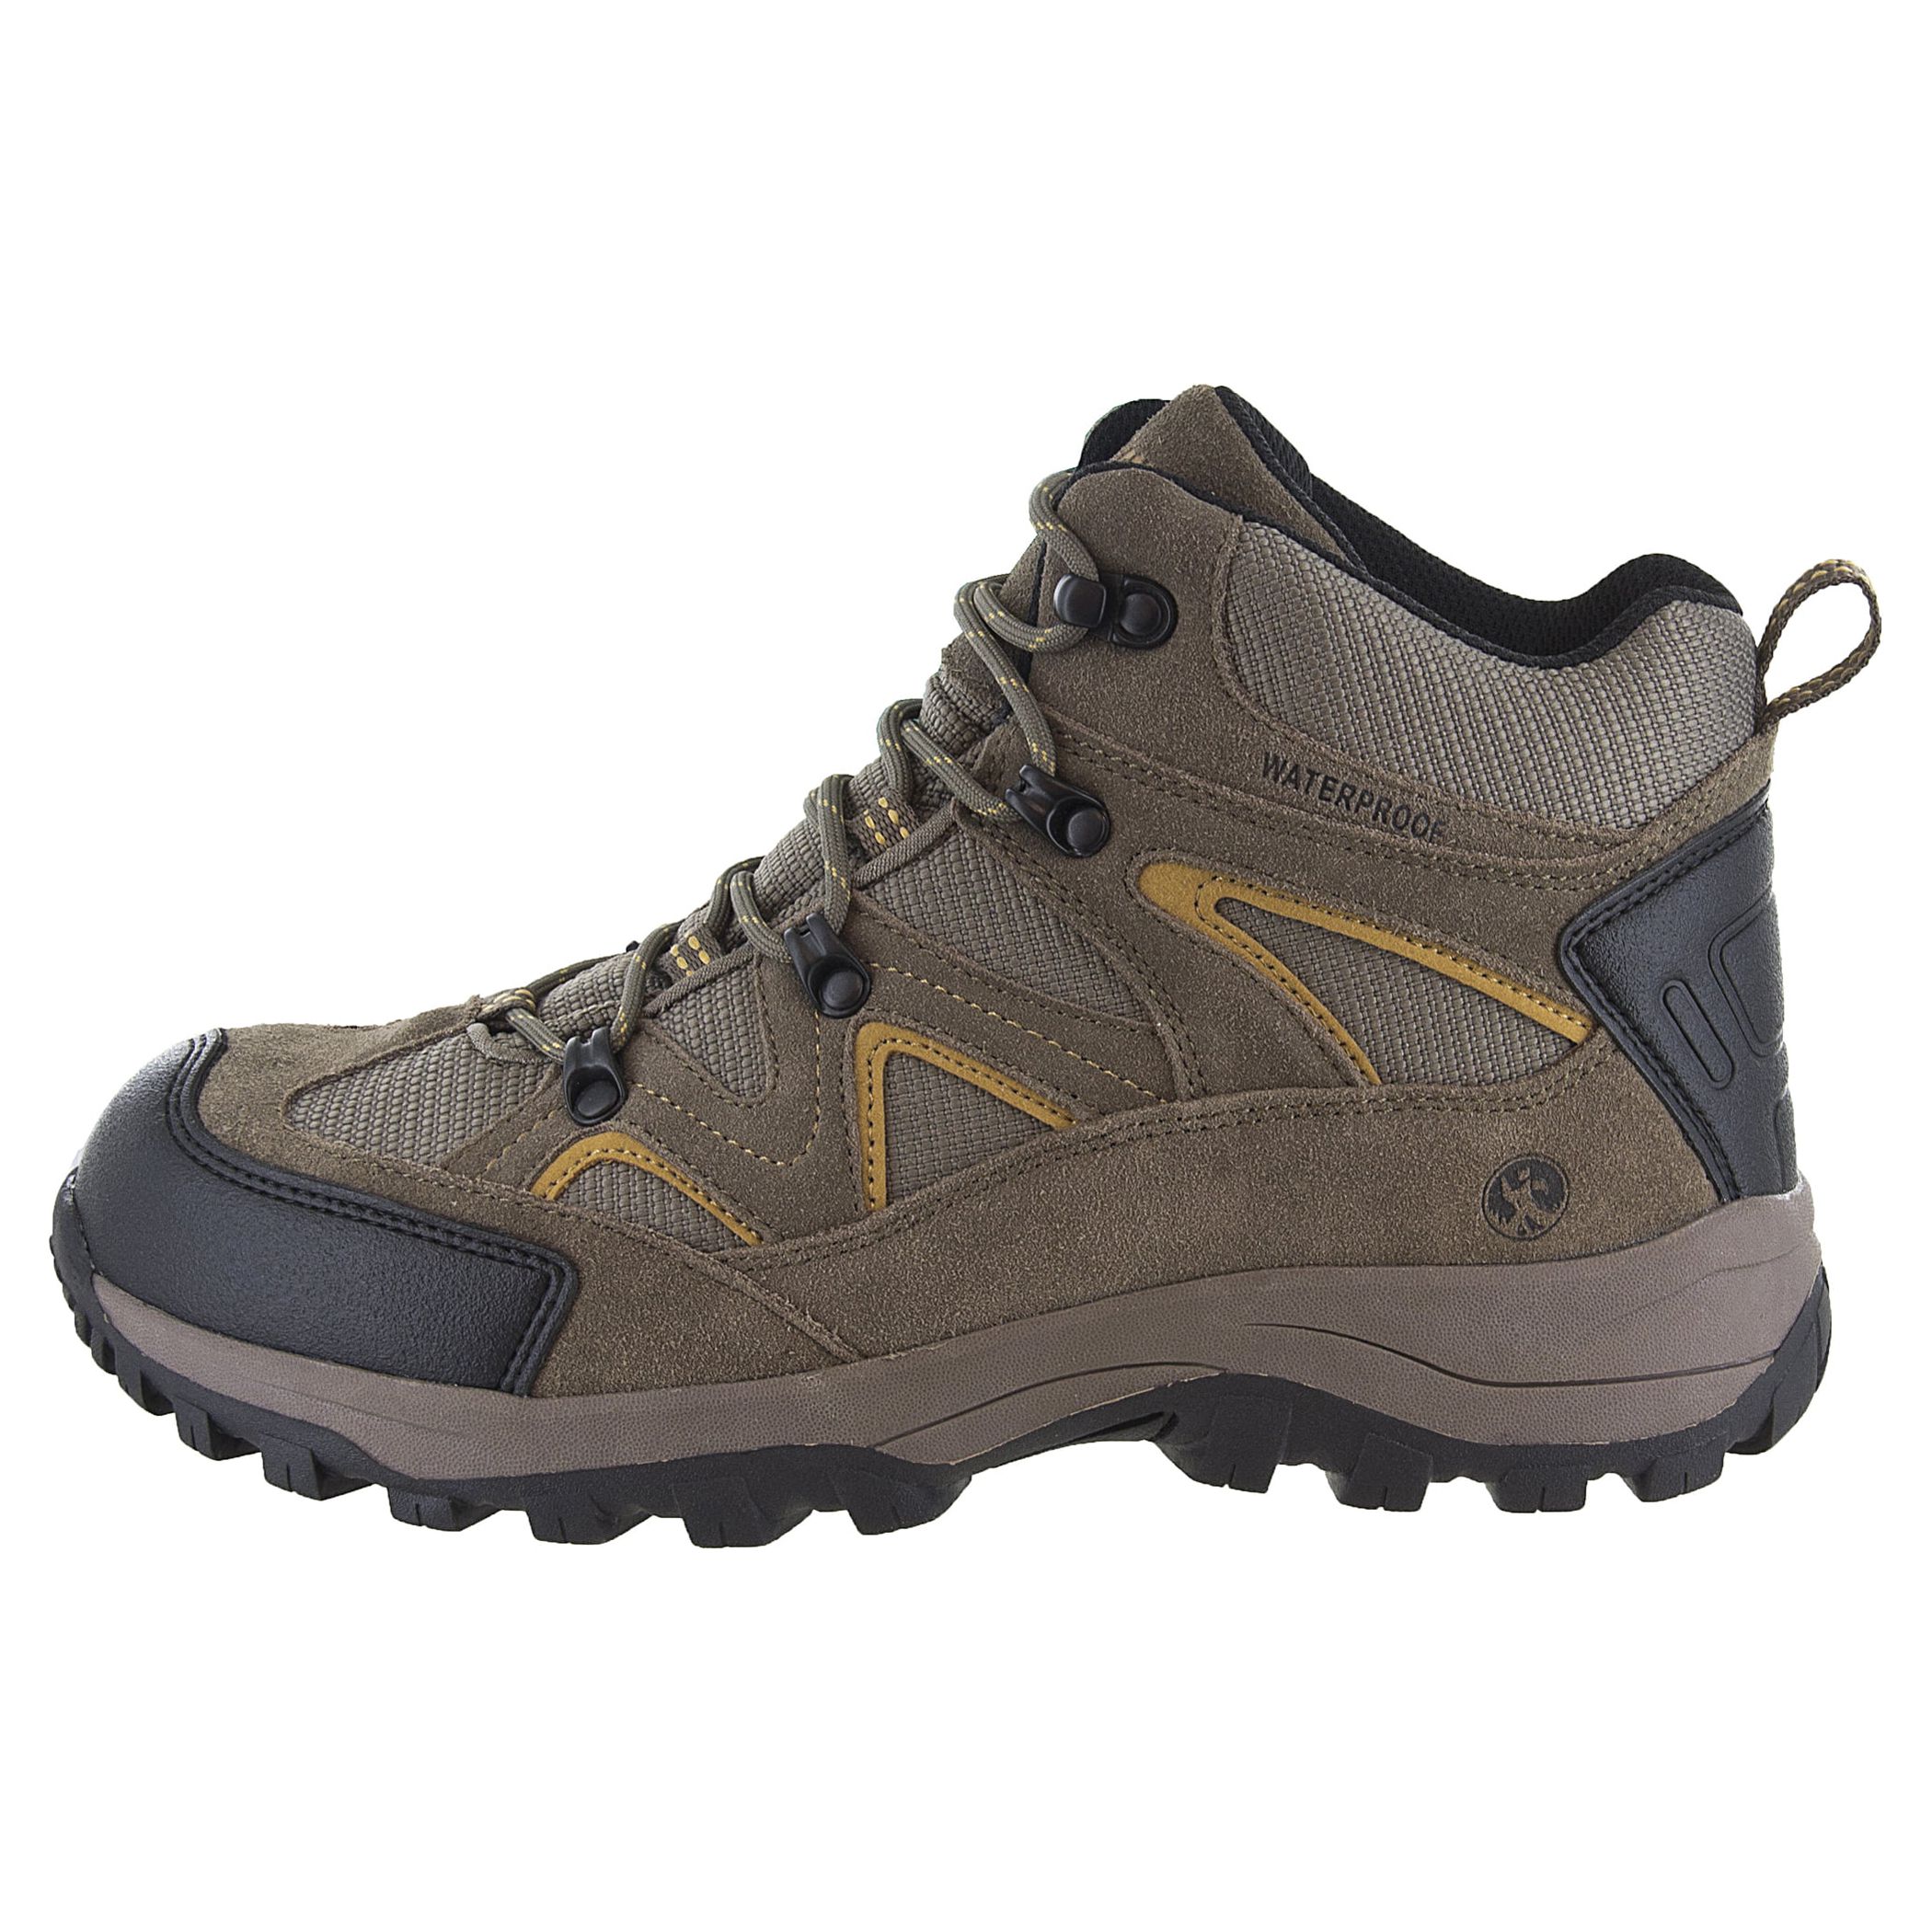 Northside Men's Snohomish Mid Waterproof Hiking Boot (Wide Available) - image 3 of 6